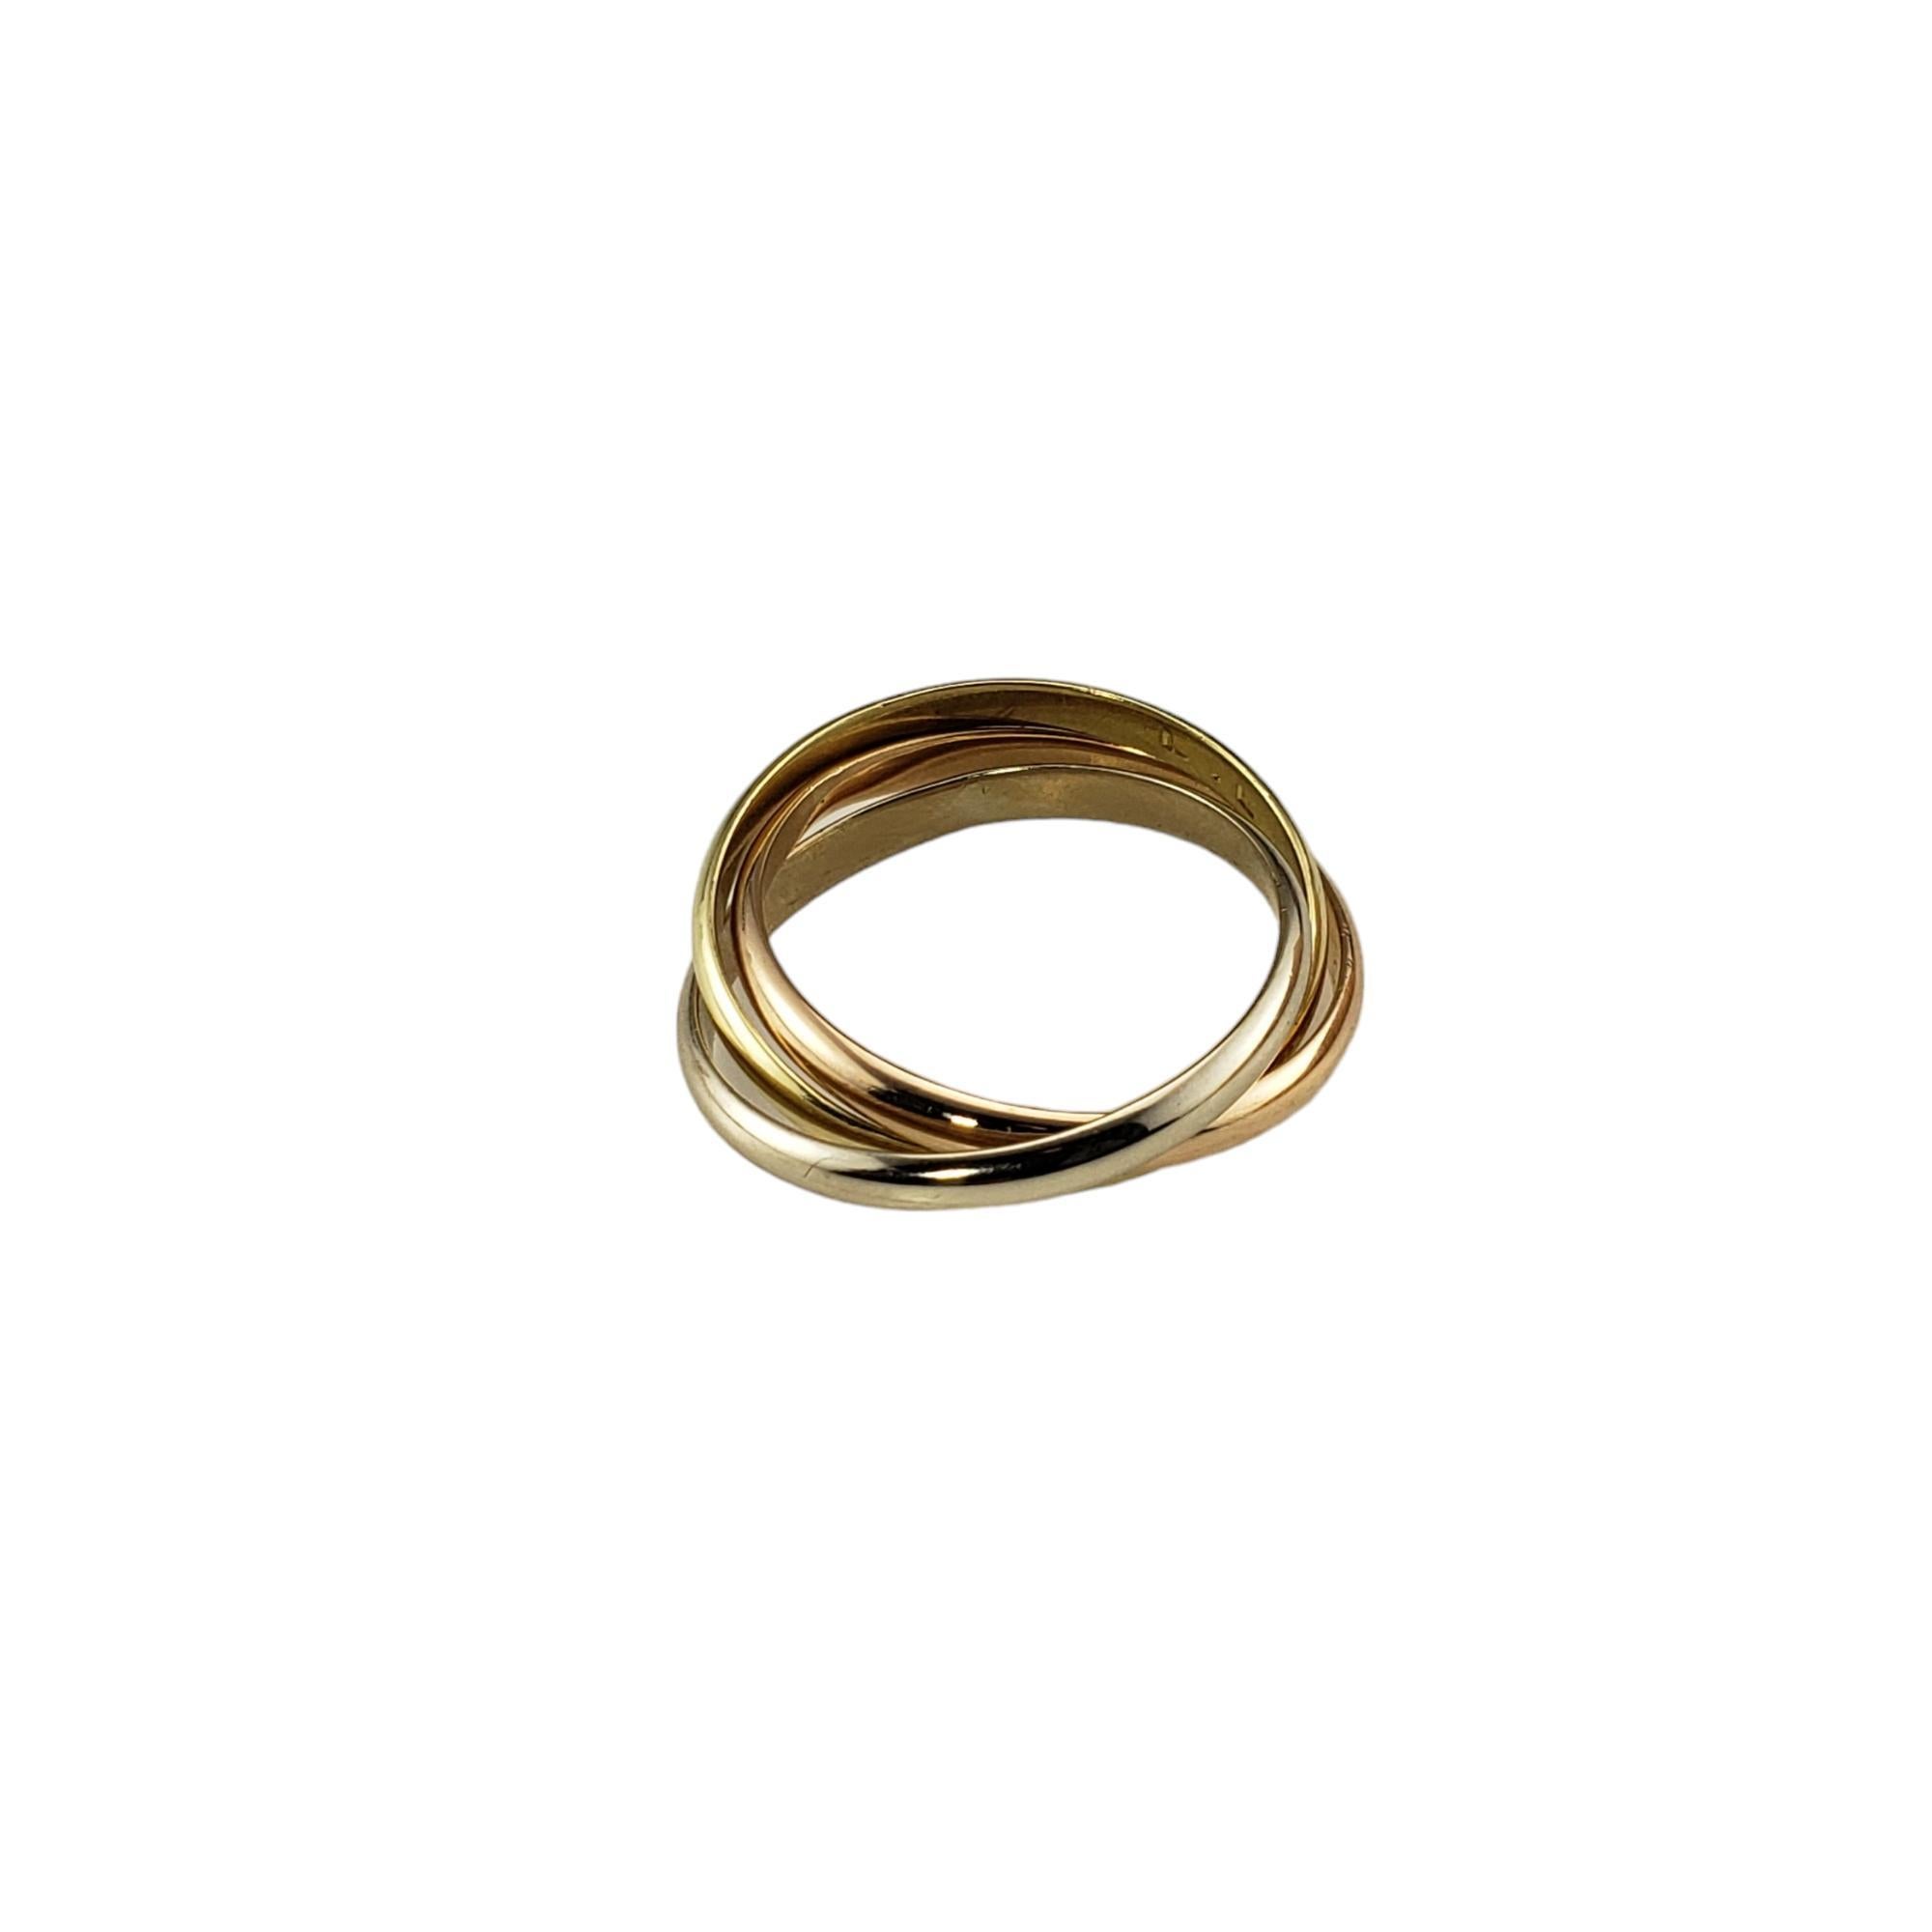 Vintage Cartier 18 Karat Tricolor Rolling Trinity Ring Size 8.5

This elegant three band ring by Cartier is crafted in beautifully detailed 18K yellow, white and rose gold.  

Width: 5 mm.  Each band measures 2 mm.

Inner inscription reads 